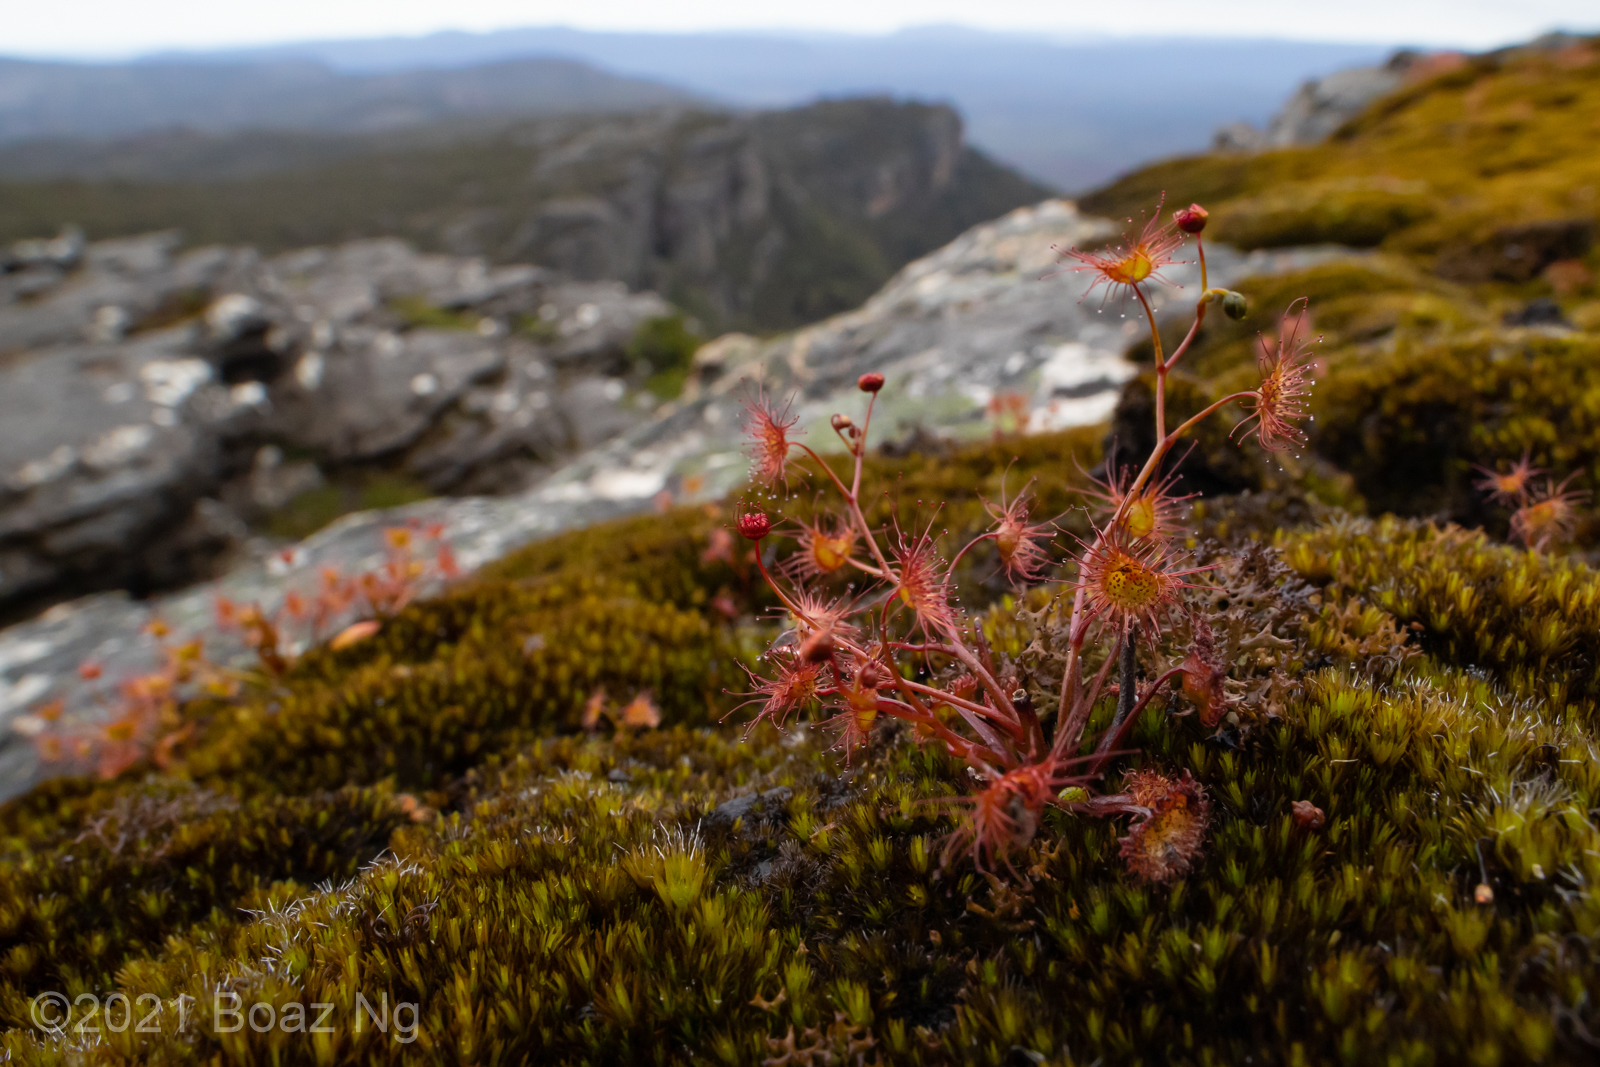 Multi-stemmed red Drosera auriculata from the peaks of the Grampians